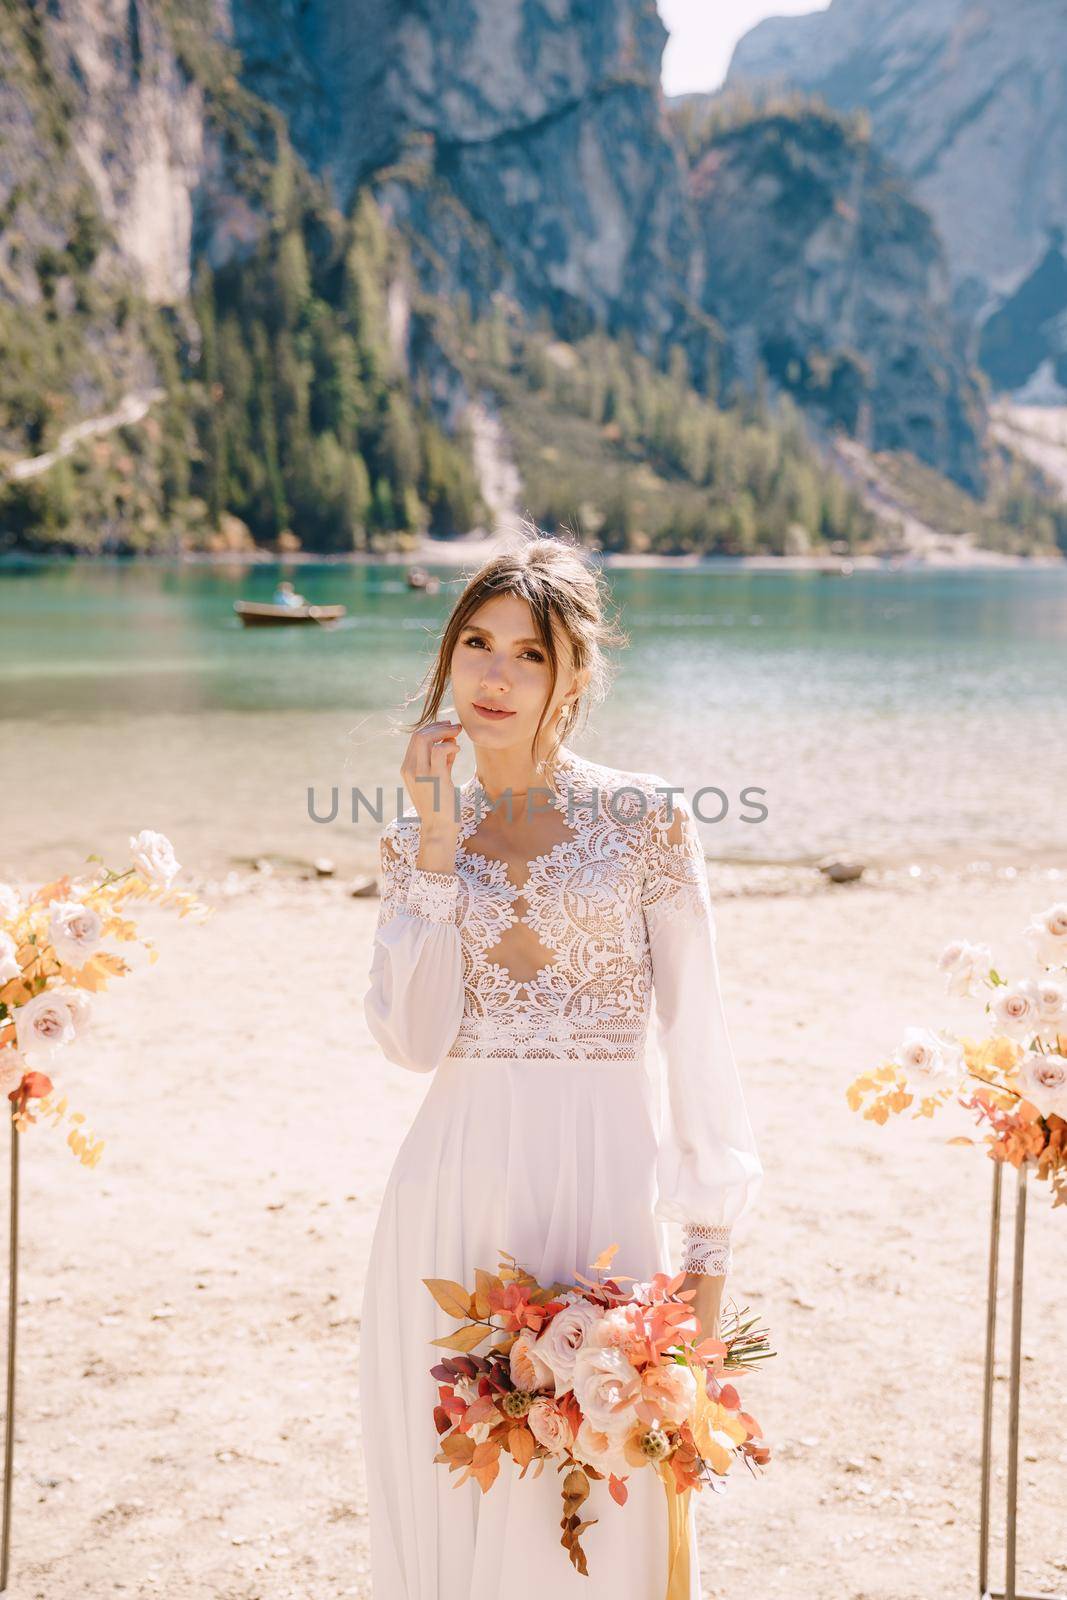 Beautiful bride in a white dress with sleeves and lace, with a yellow autumn bouquet on background of the arch for ceremony, at Lago di Braies in Italy. Destination wedding in Europe, on Braies lake. by Nadtochiy